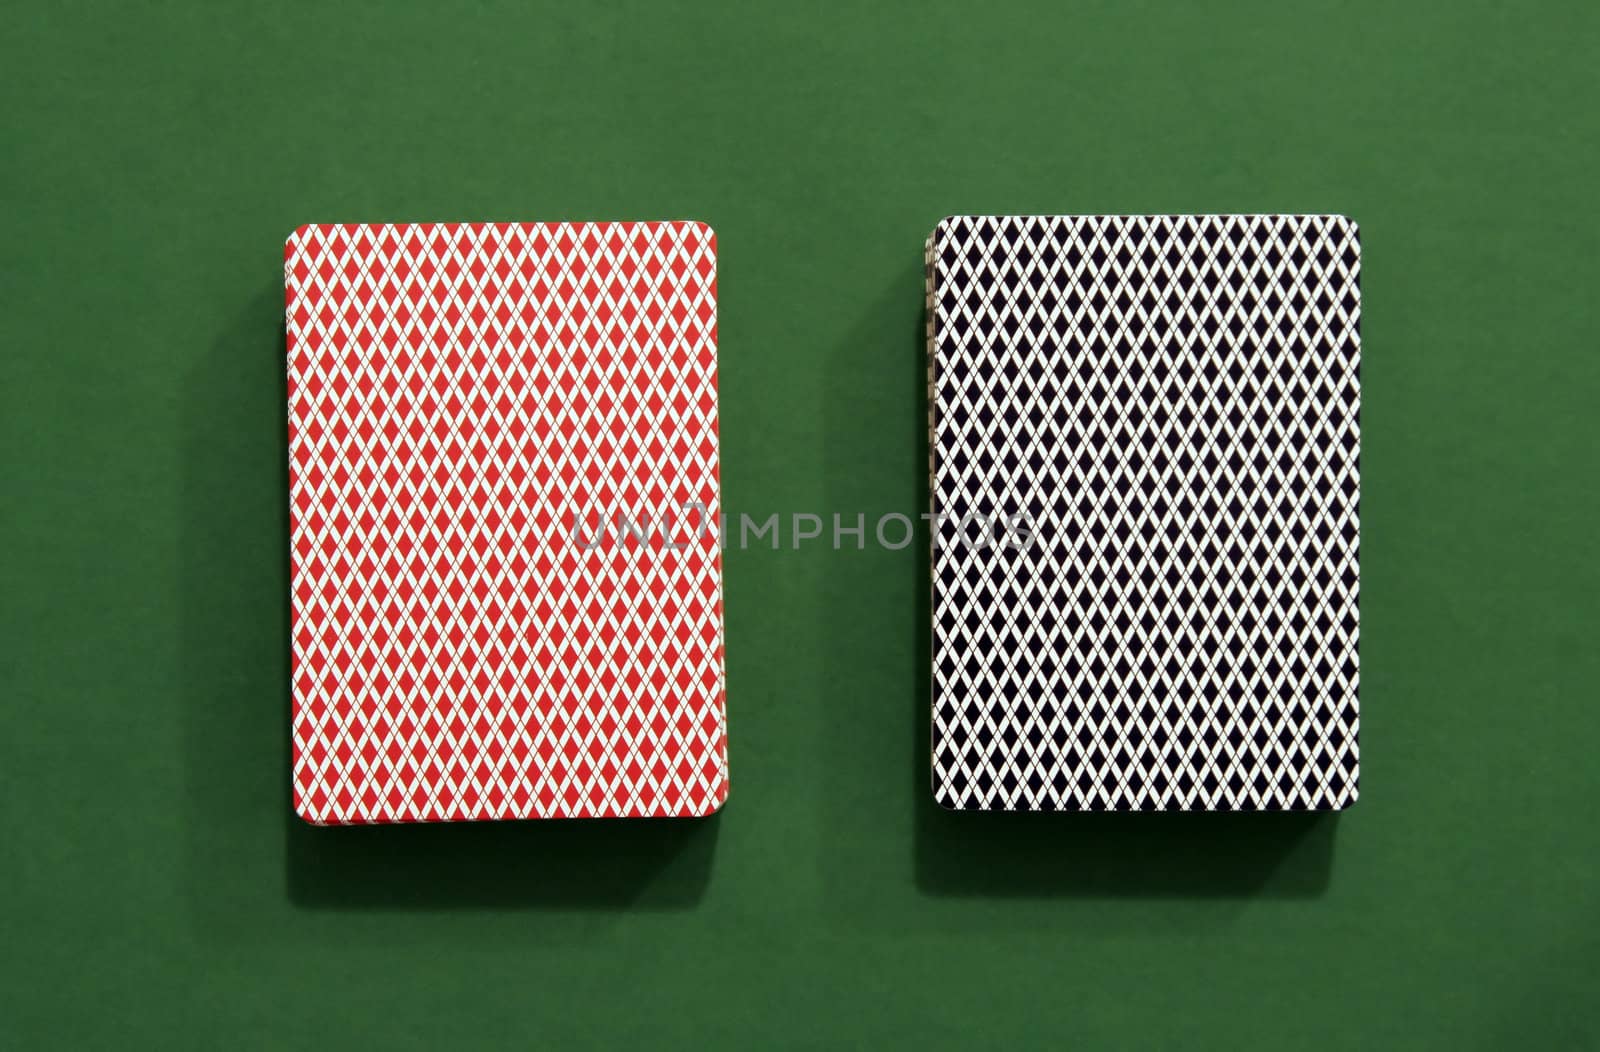 Two Decks of Cards on Green Background